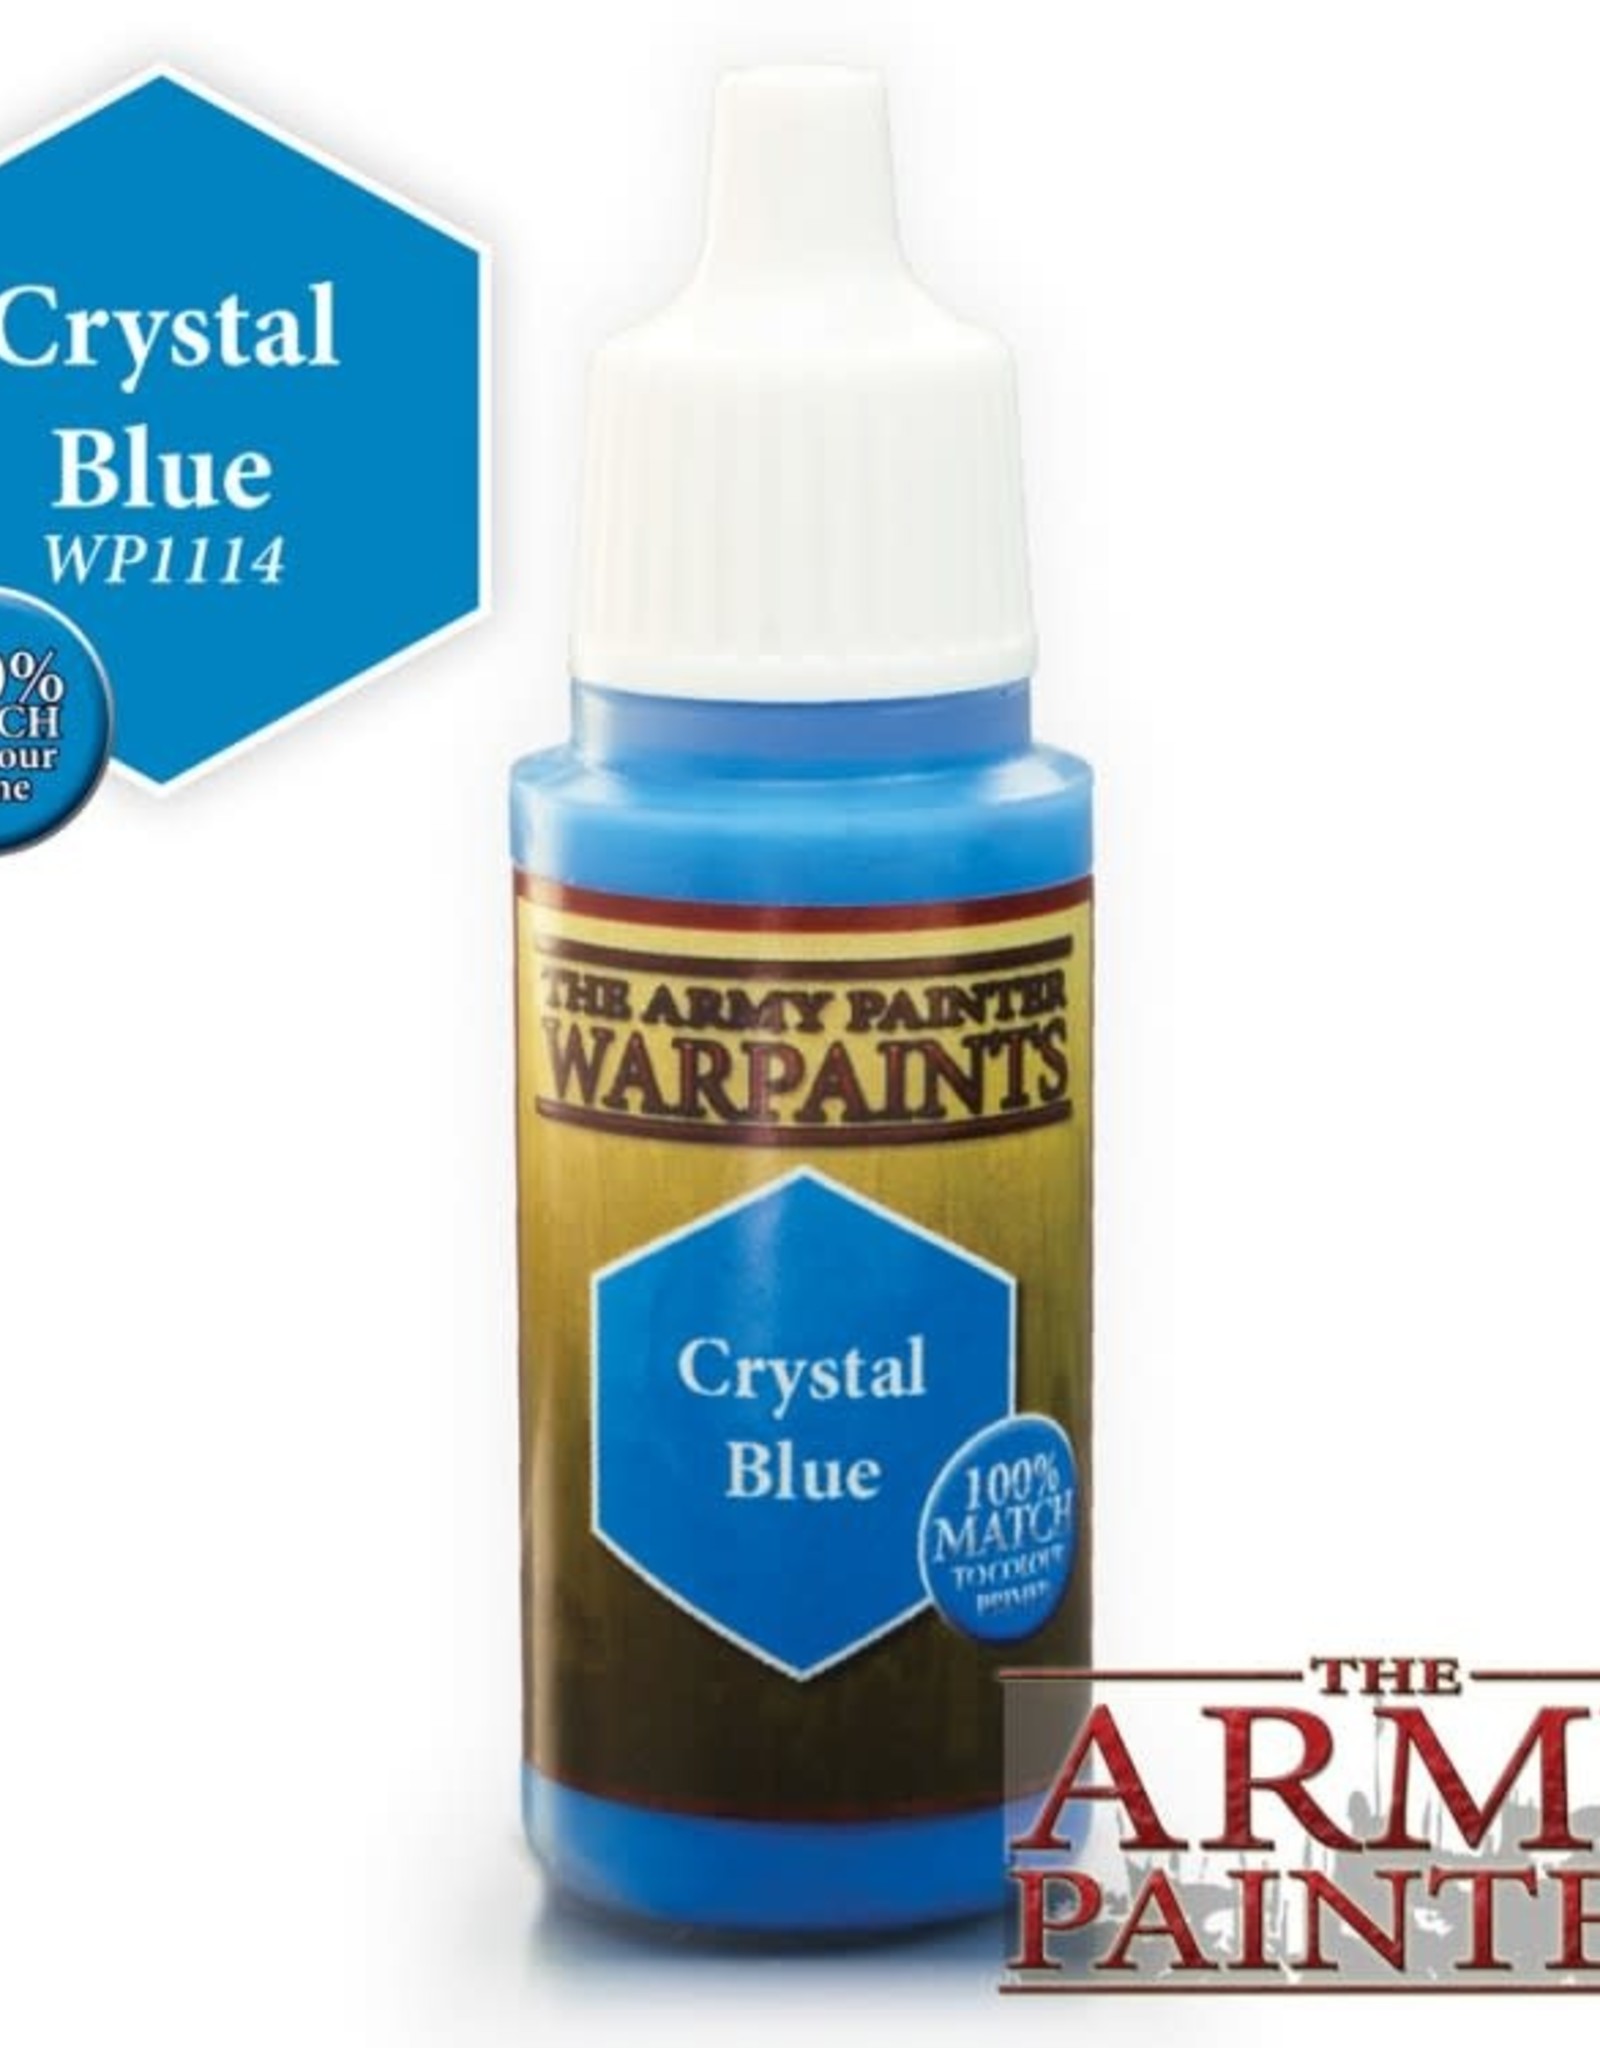 The Army Painter Warpaints - Crystal Blue